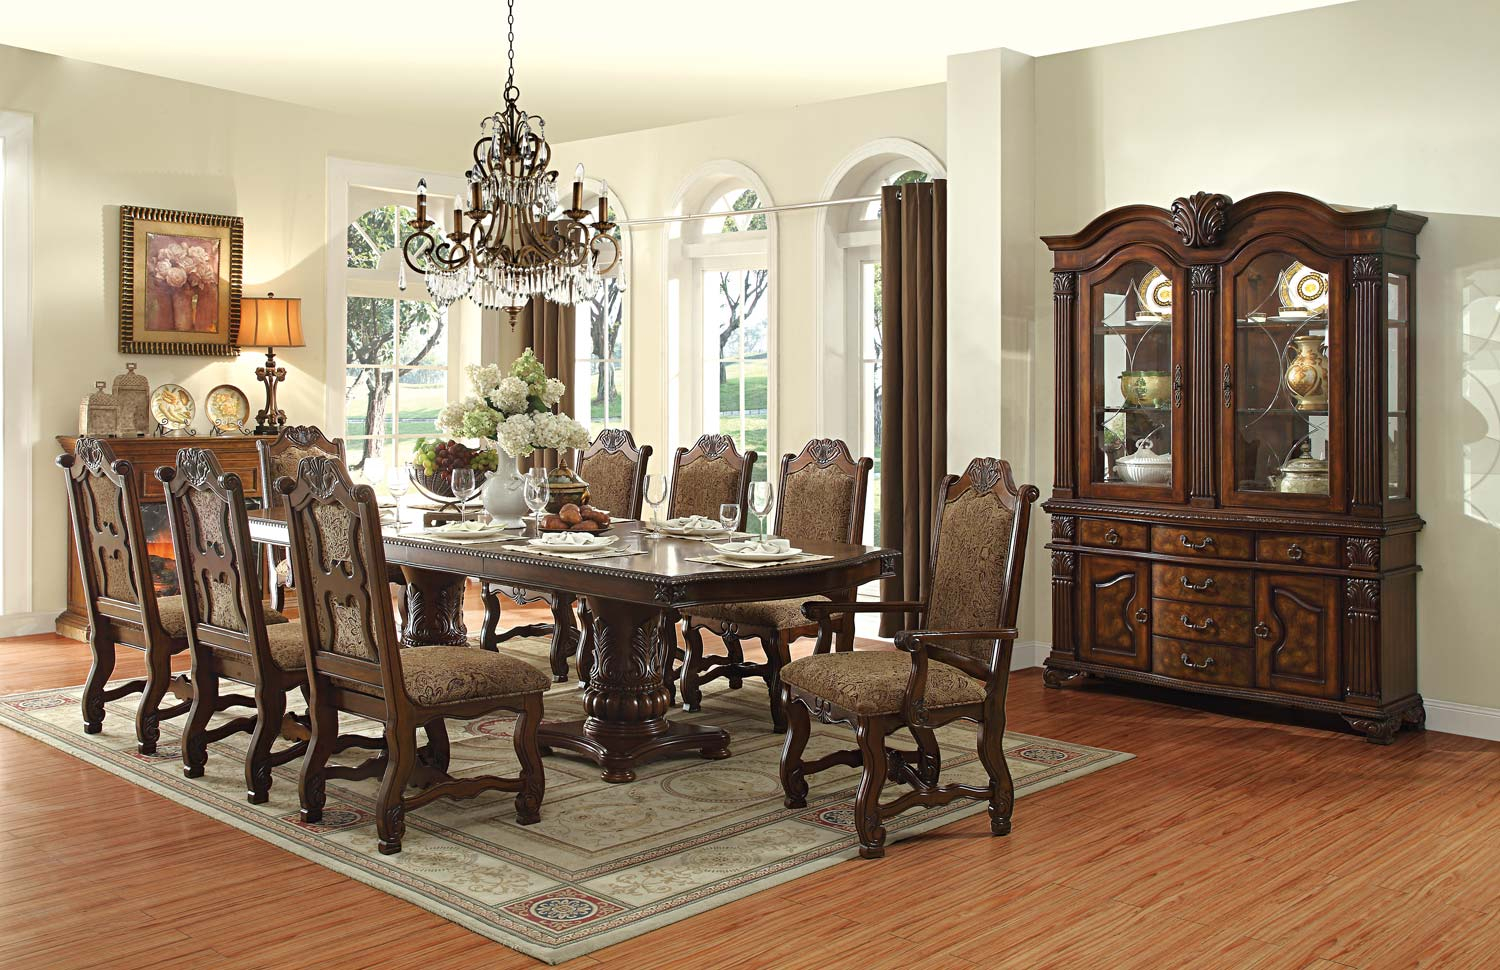 10 Seat Formal Dining Room Sets • Faucet Ideas Site